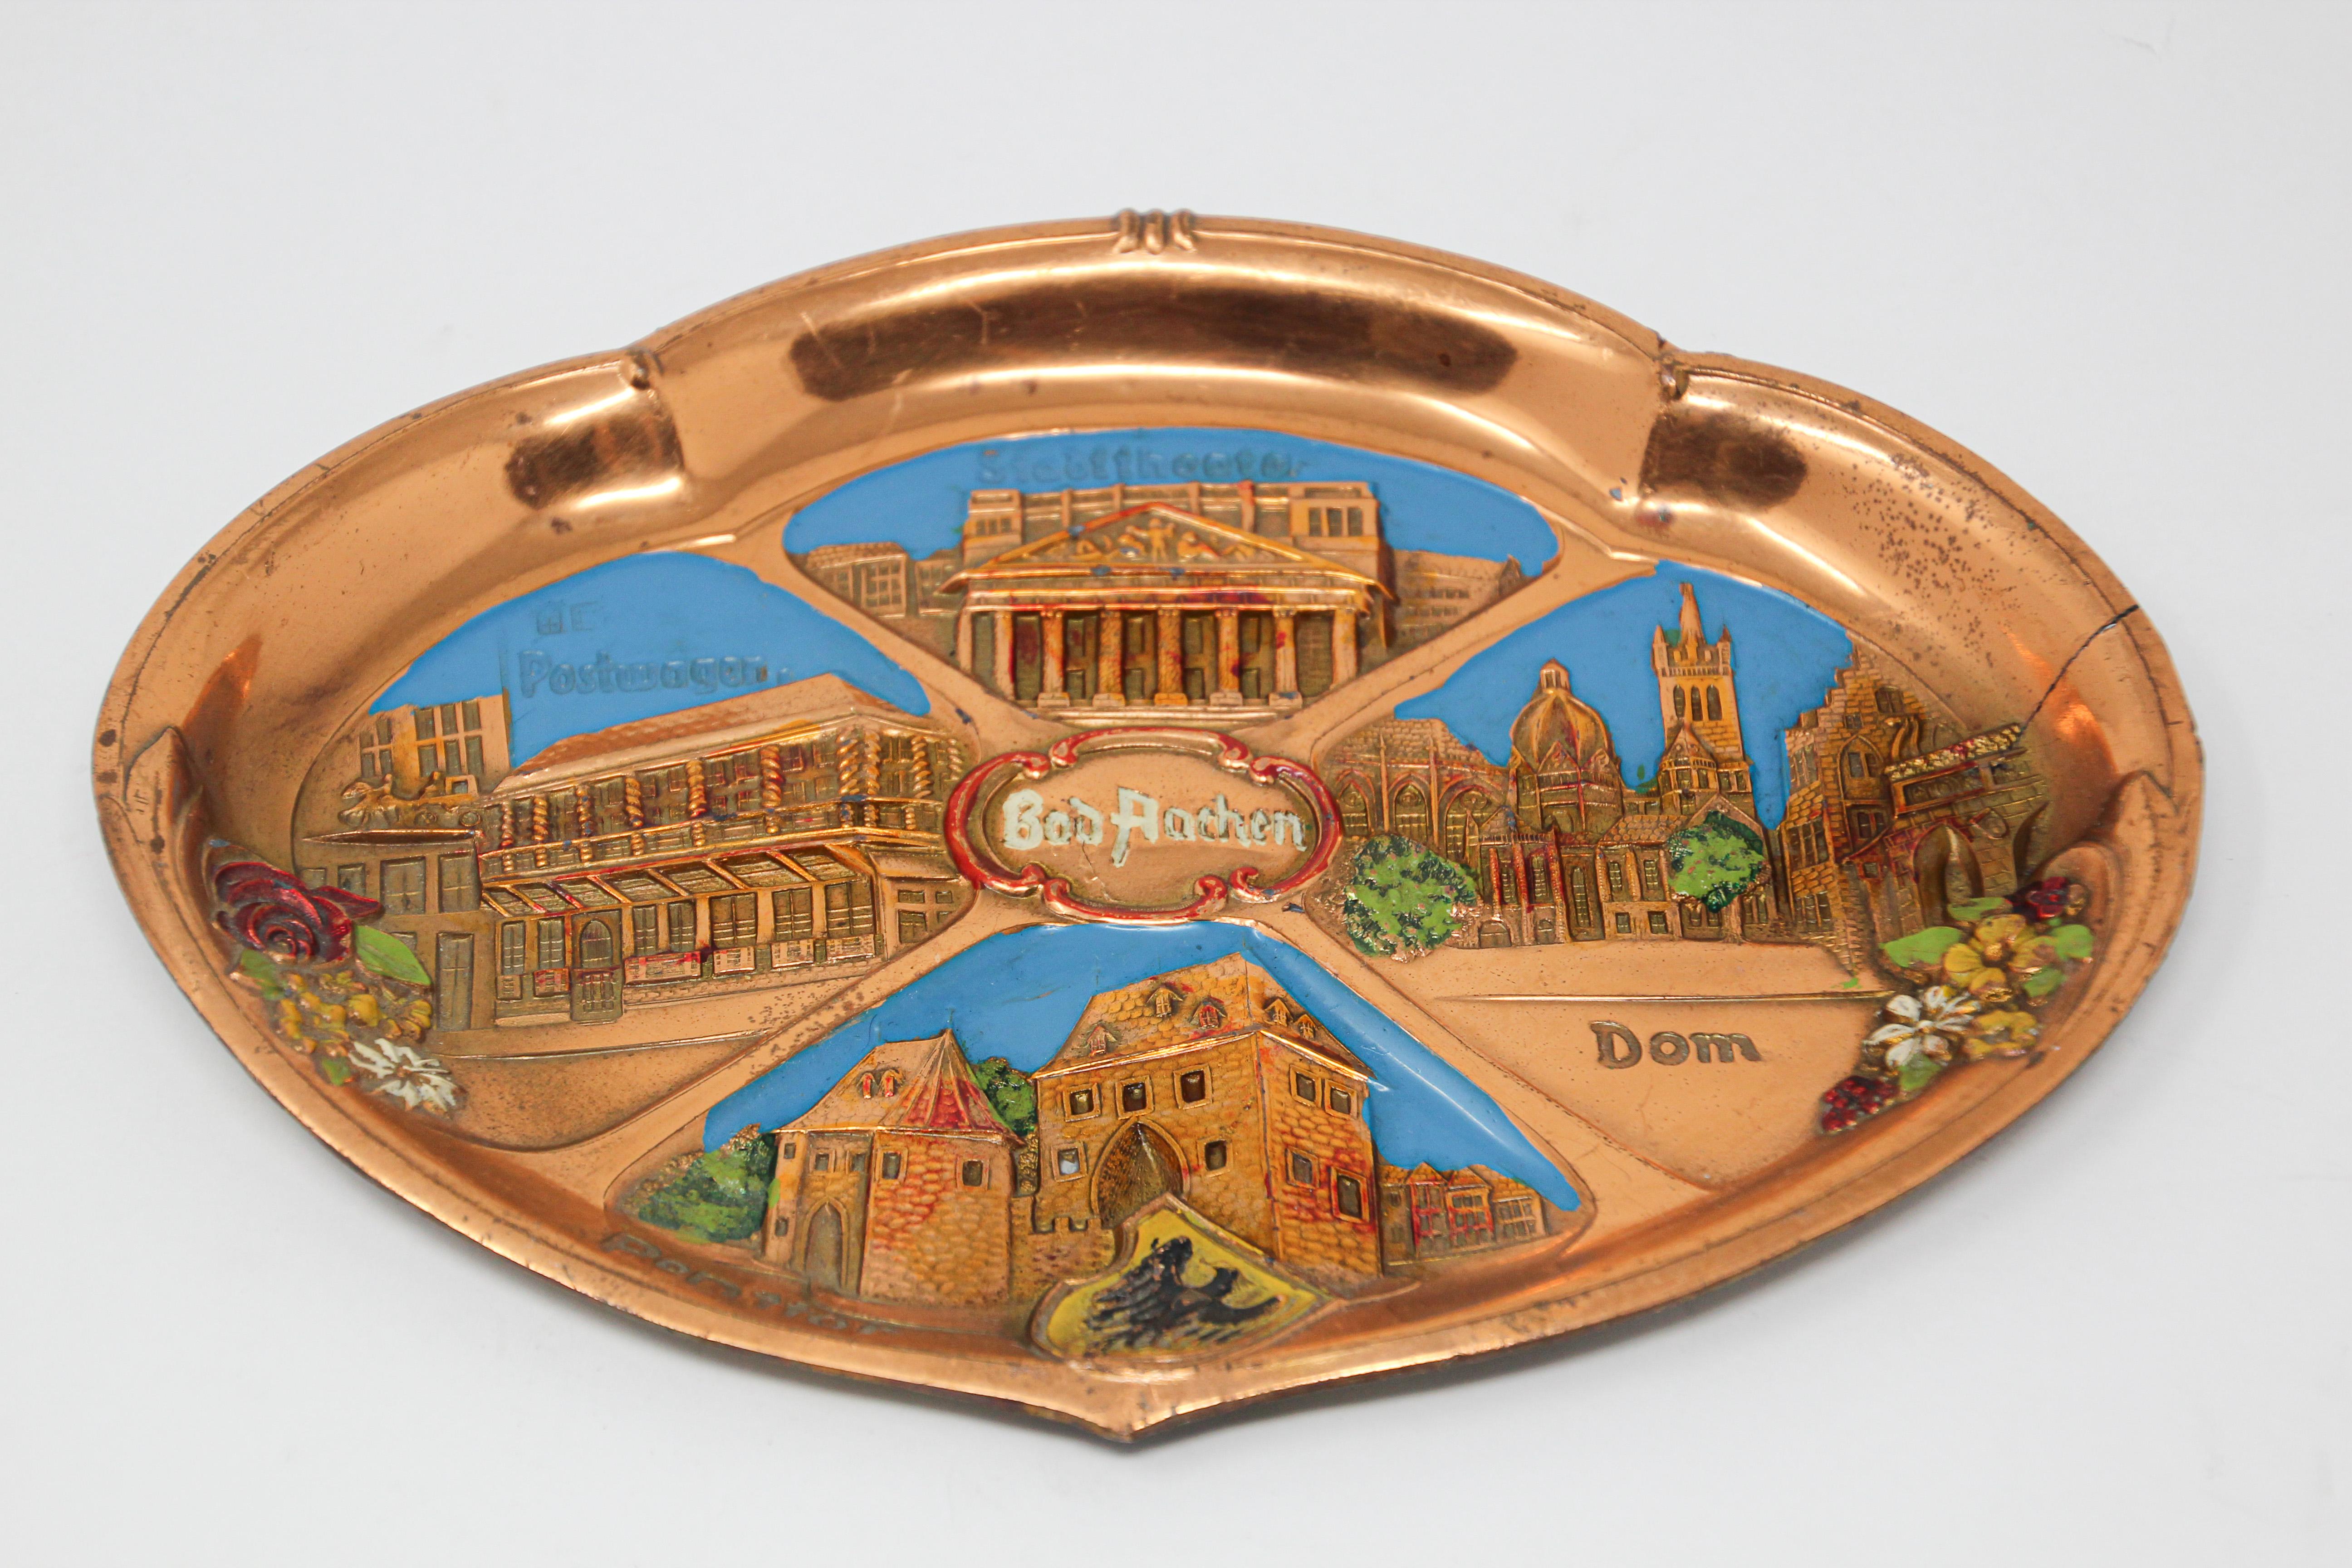 Two metal copper plates Souvenir of Germany.
One of Cologne, Koln.
Cologne is a major cultural centre for the Rhineland; it hosts more than 30 museums and hundreds of galleries. Exhibitions range from local ancient Roman archeological sites to